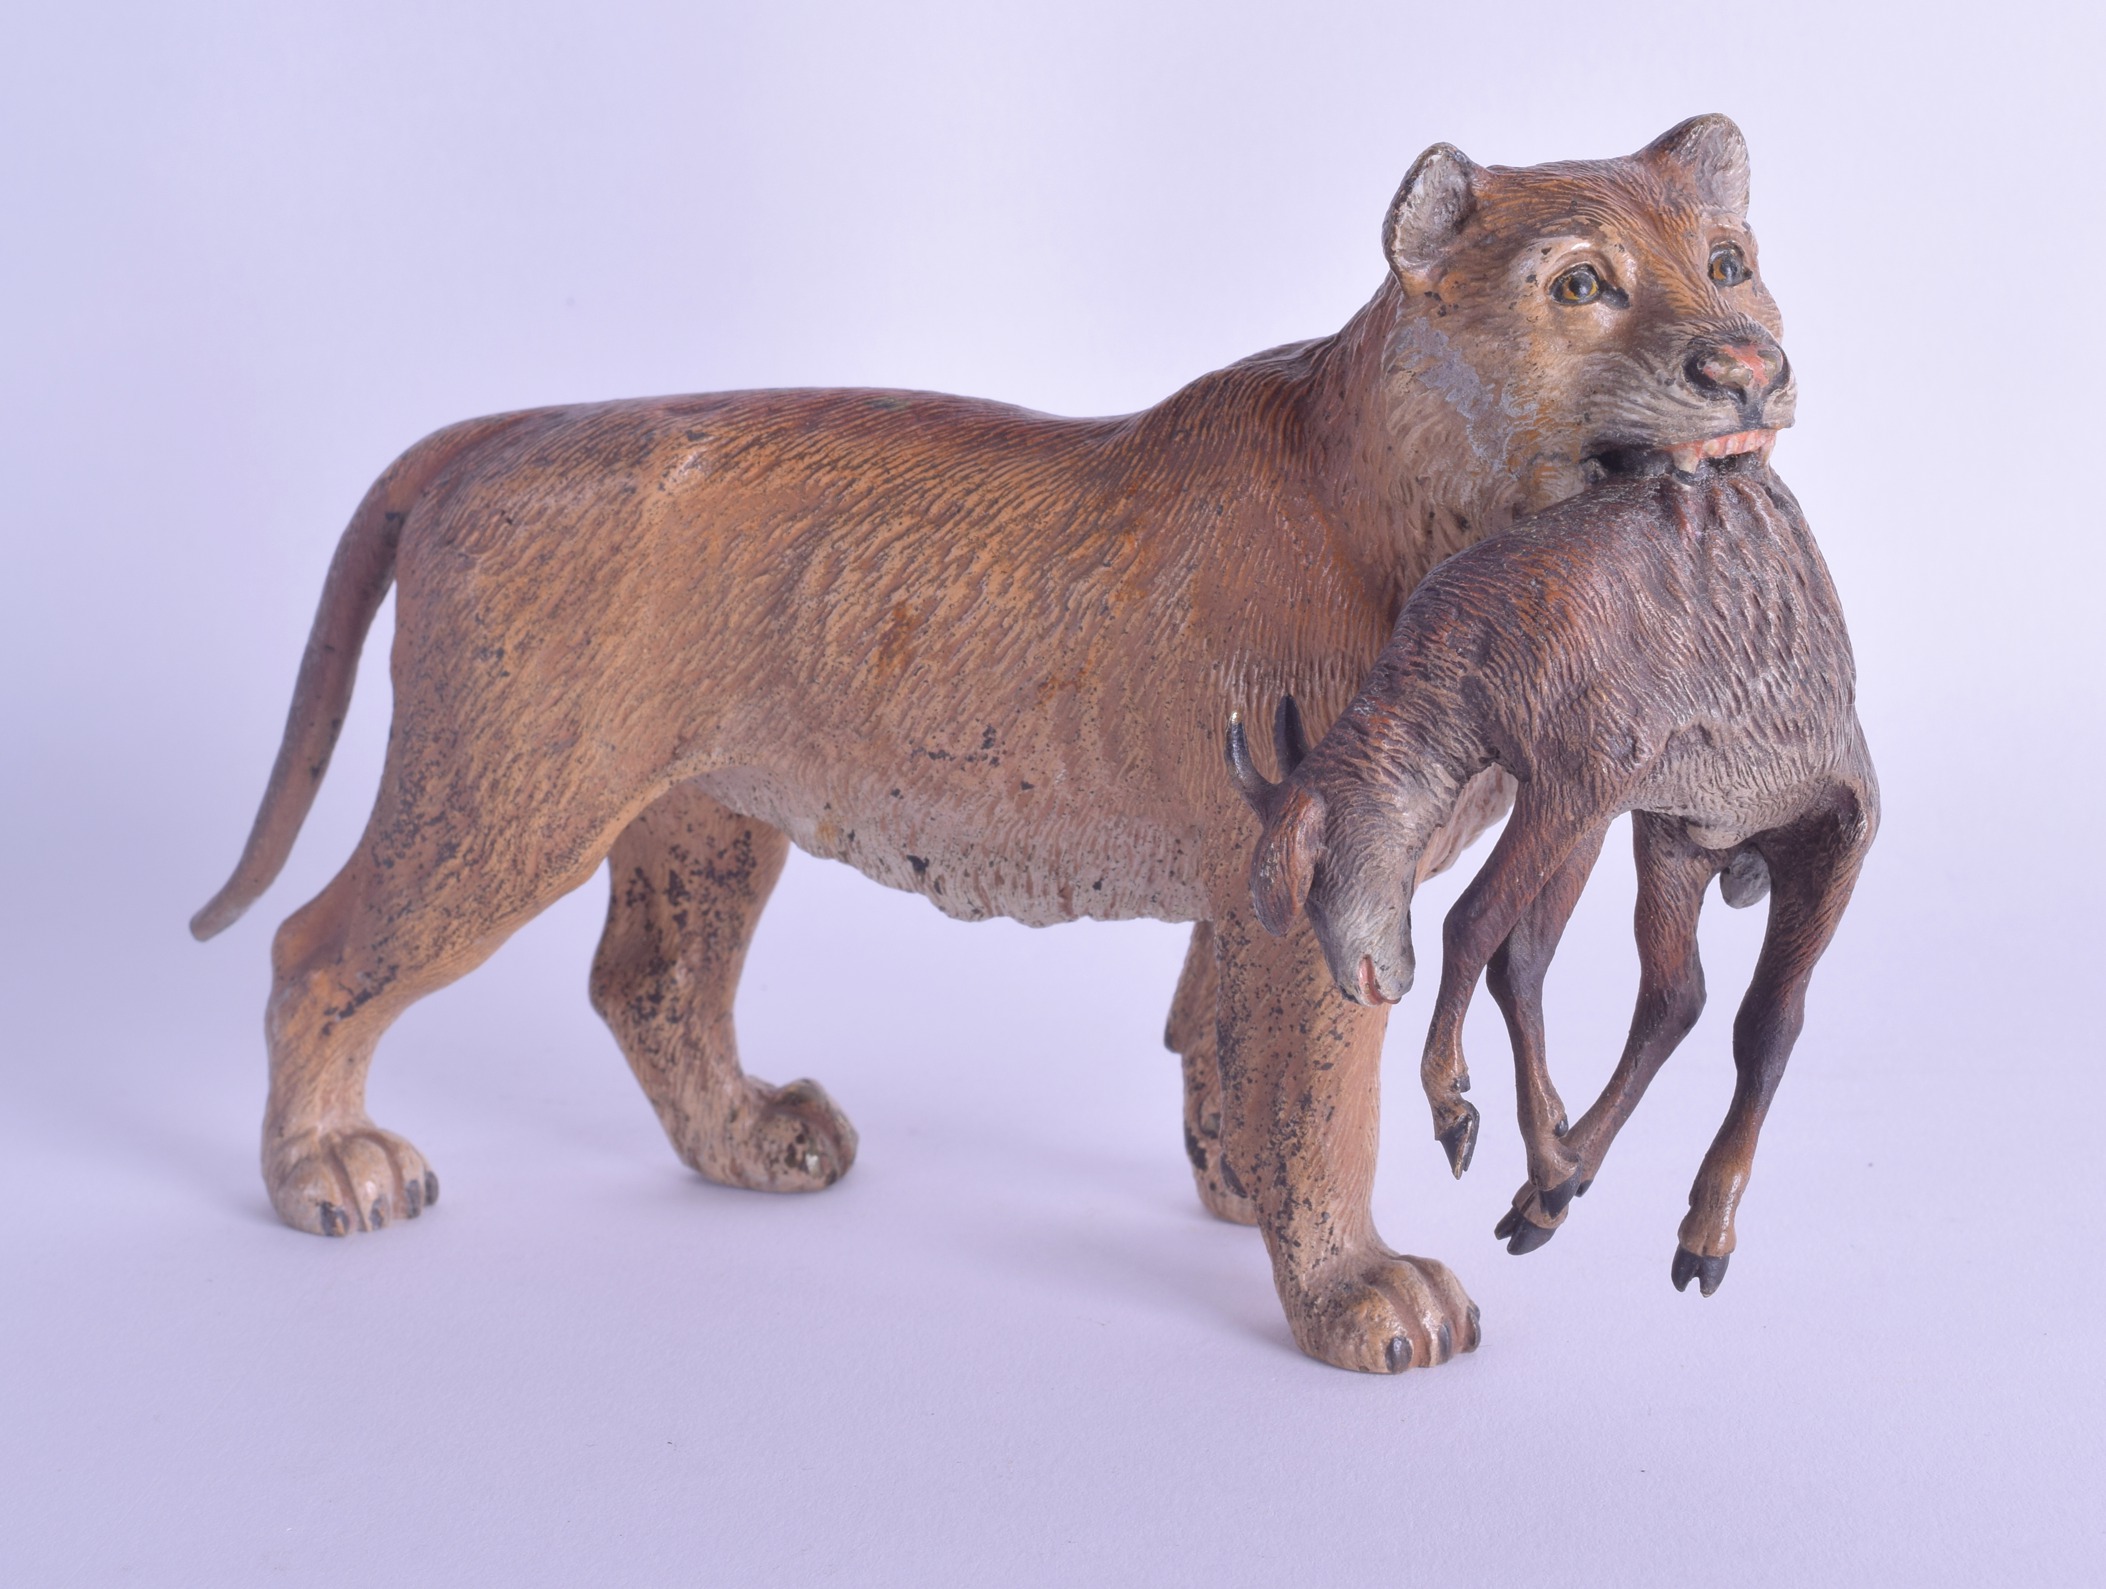 A RARE LATE 19TH CENTURY AUSTRIAN COLD PAINTED BRONZE FIGURE OF A LIONESS modelled holding a kid